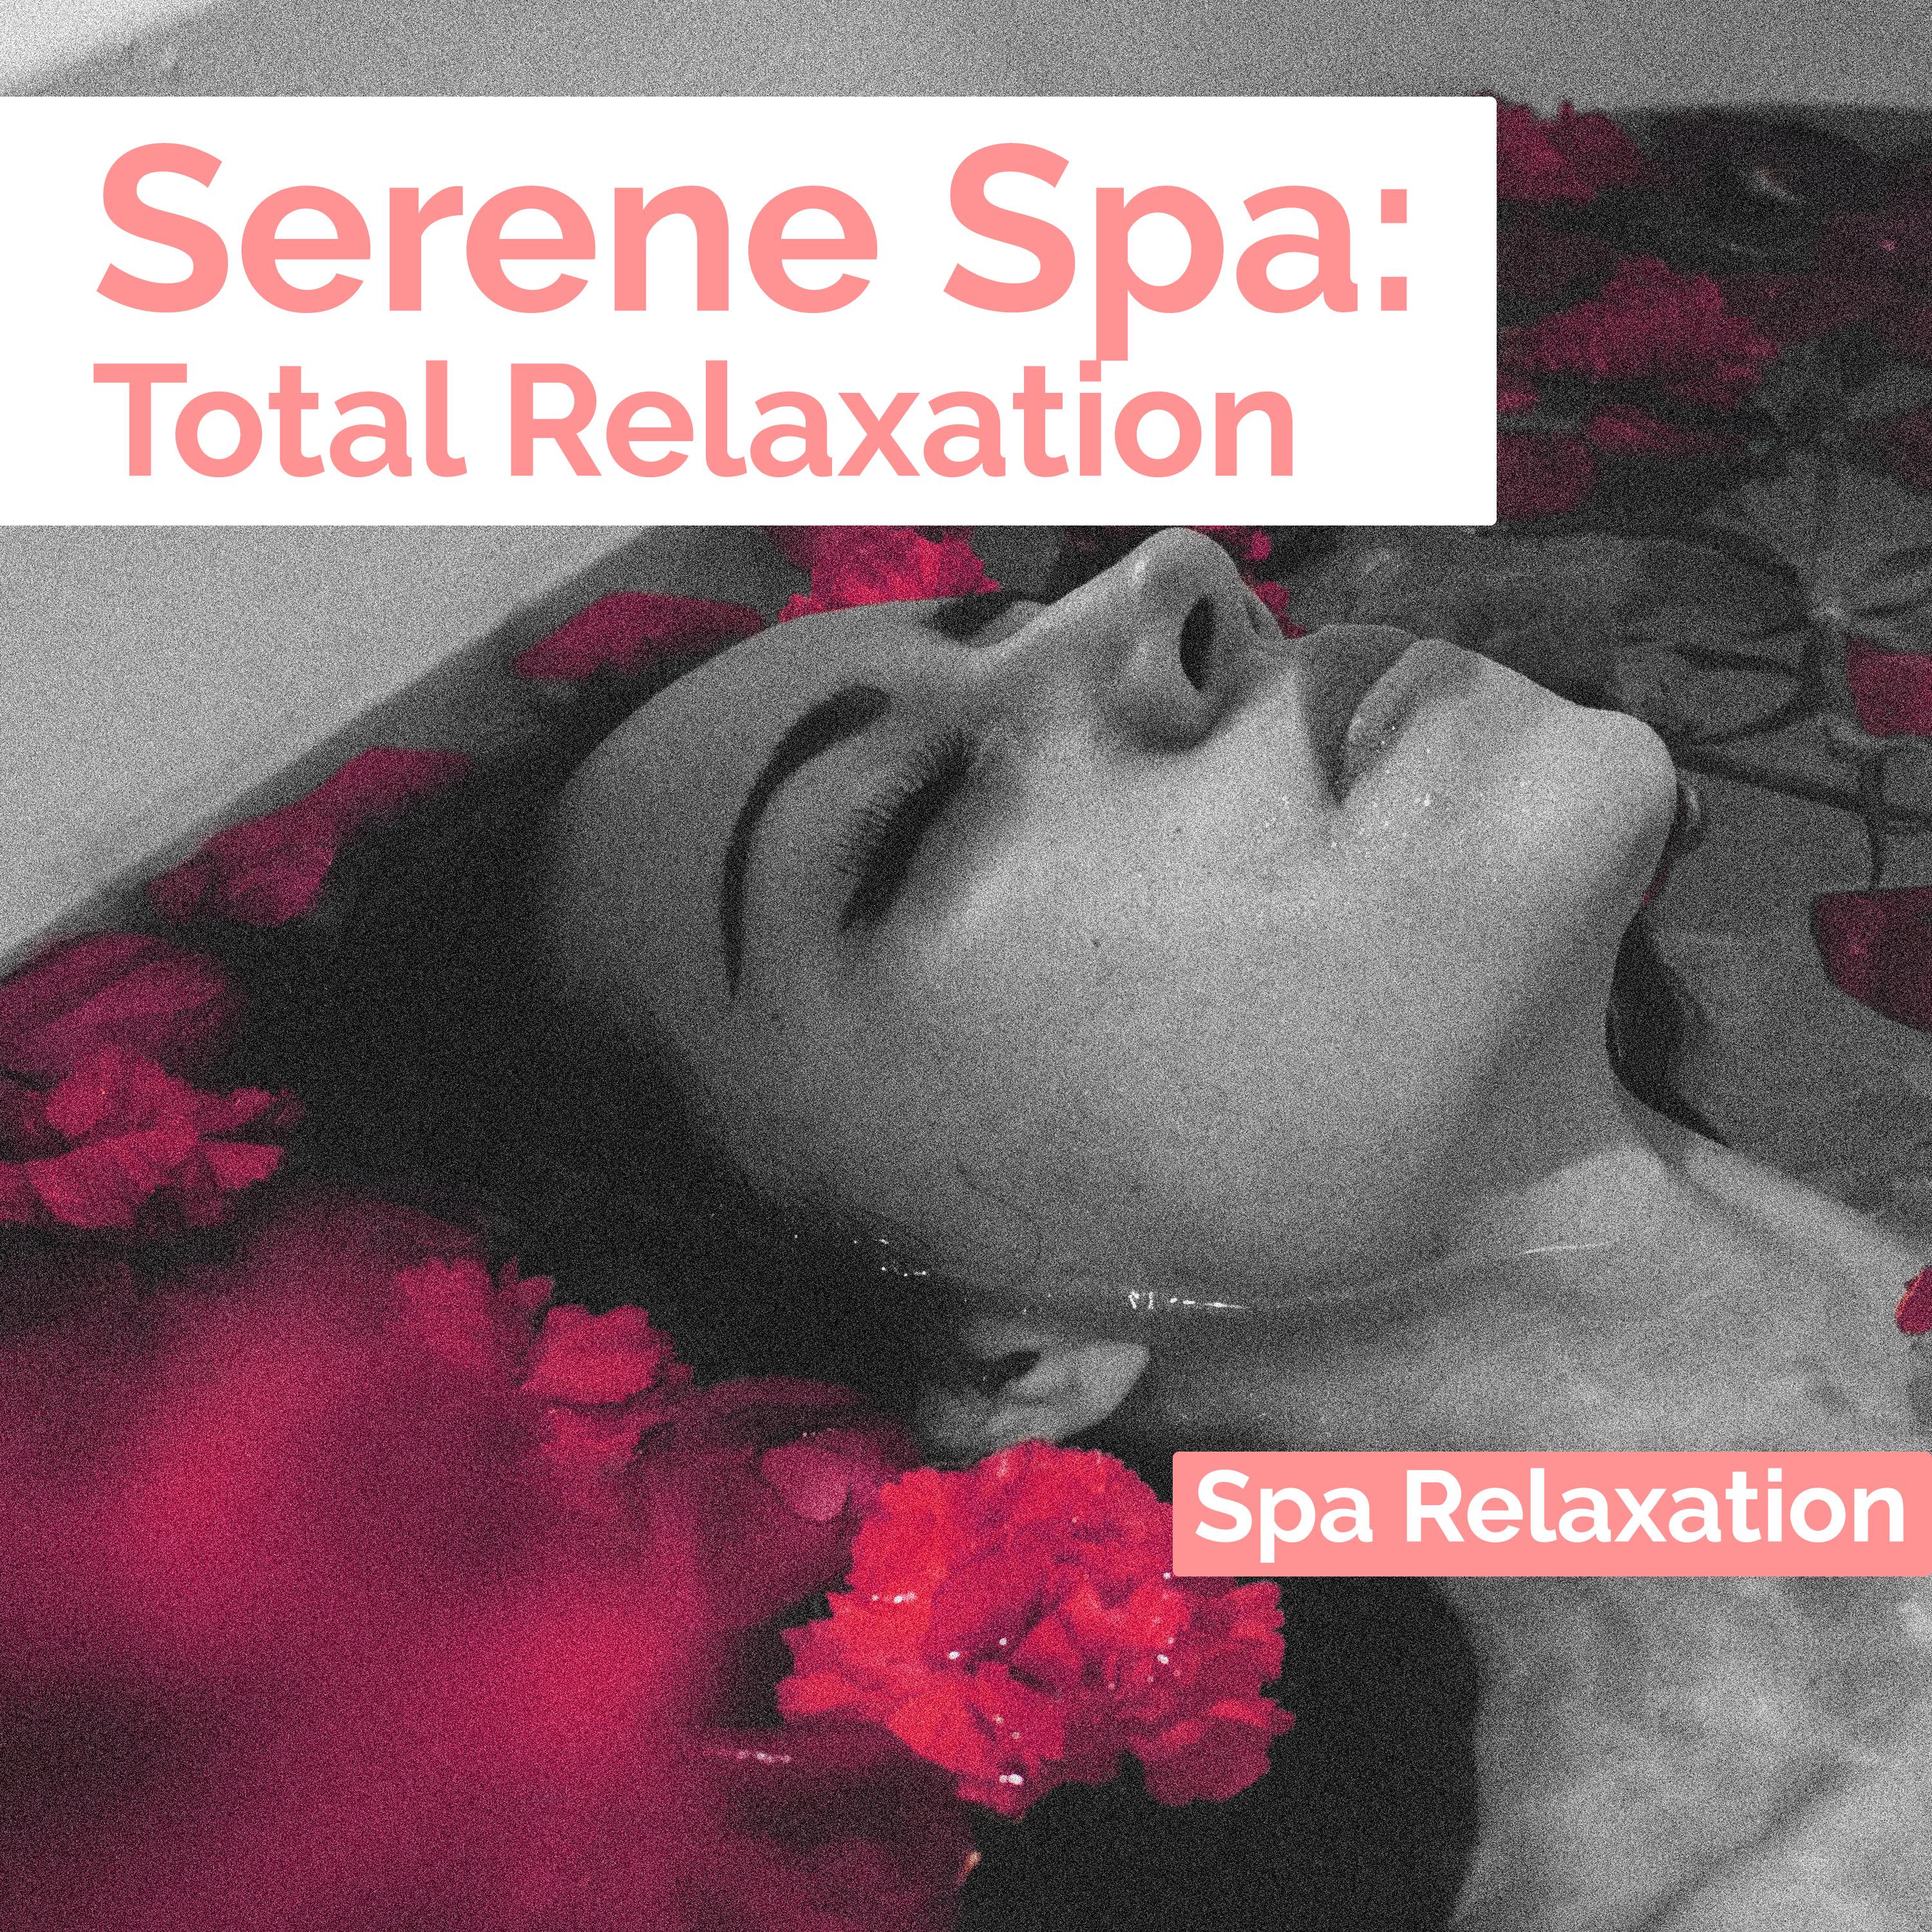 Serene Spa: Total Relaxation